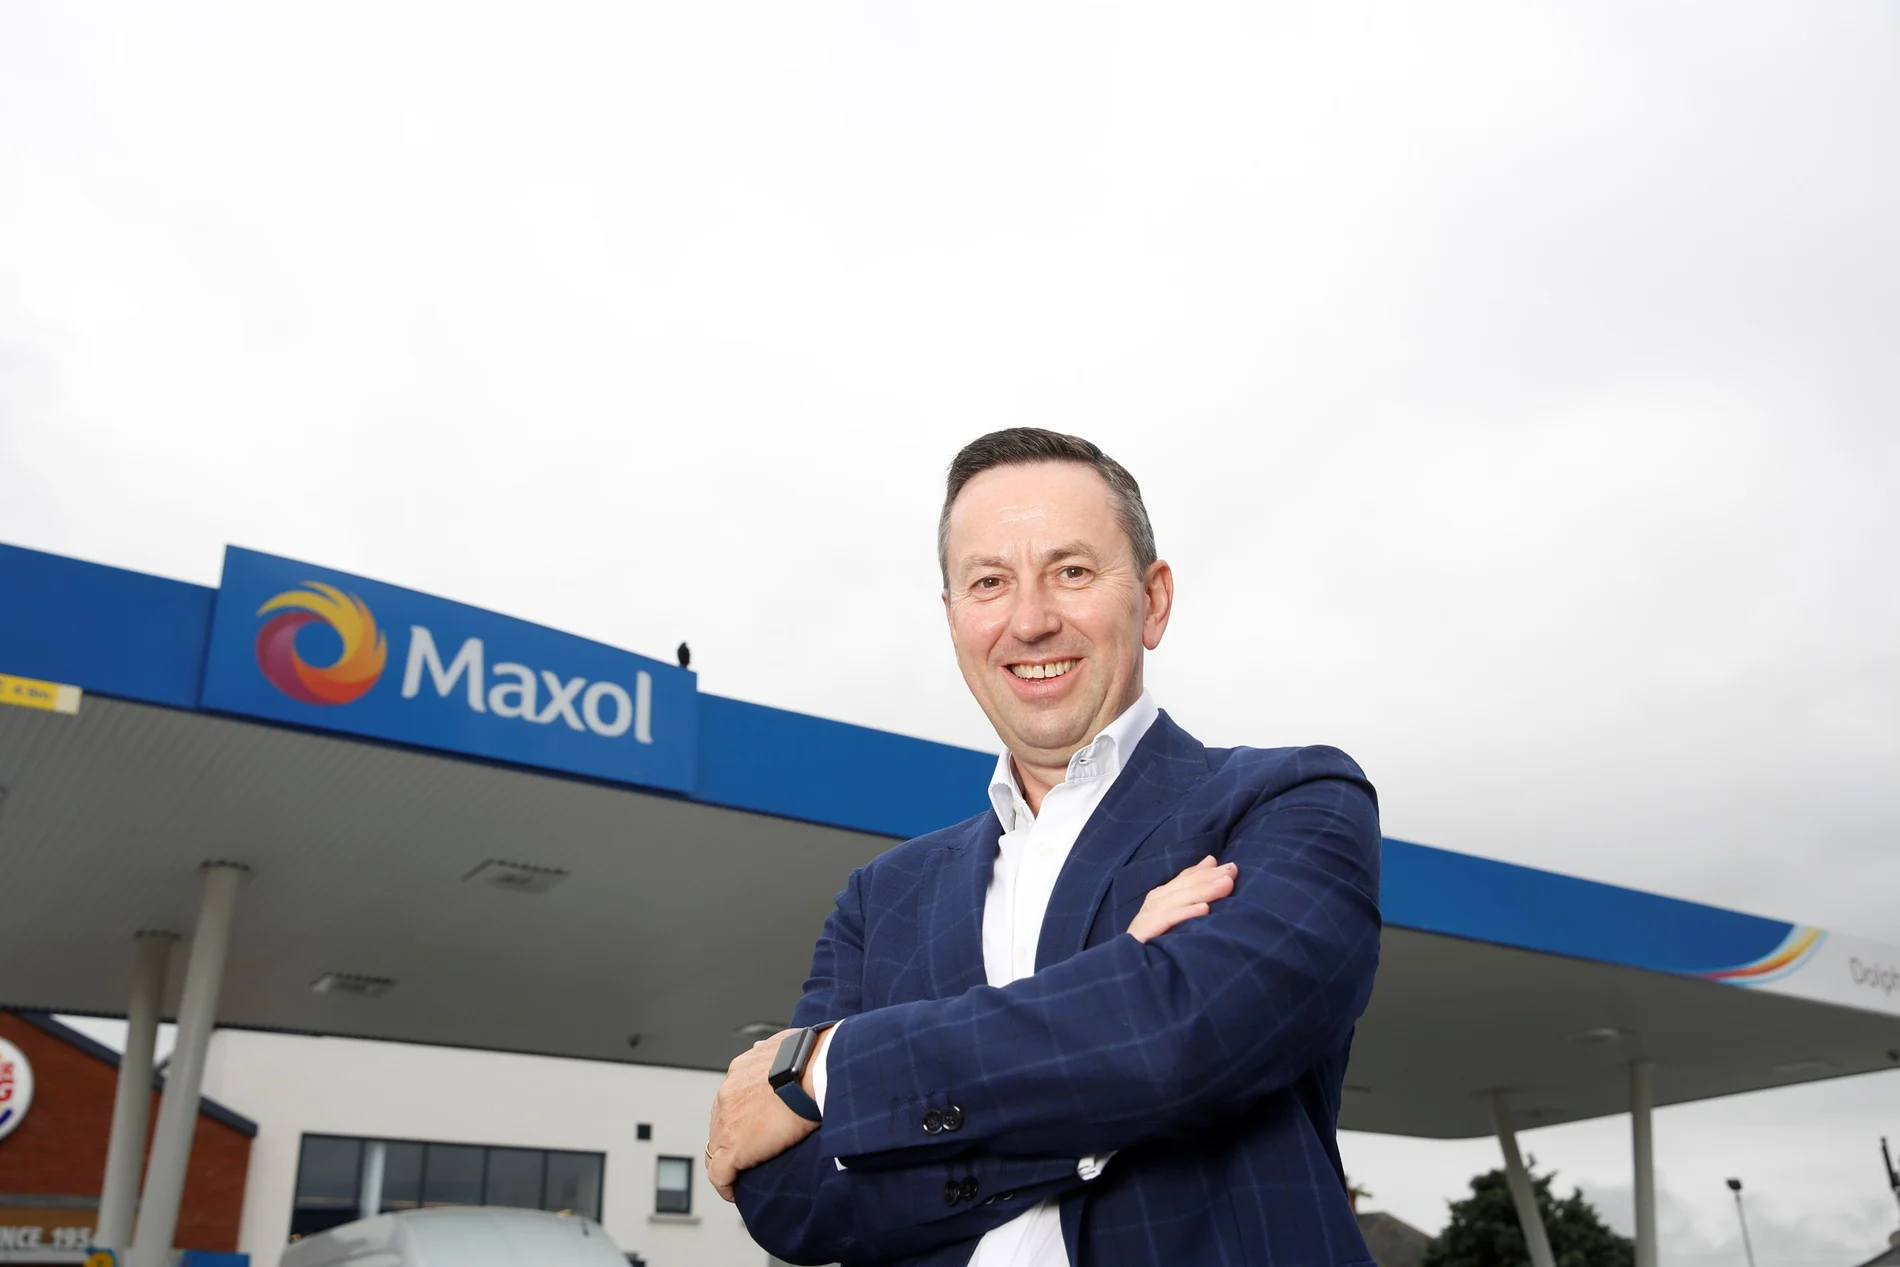 Maxol CEO Brian Donaldson Wins Coveted NACS Industry Leader Award